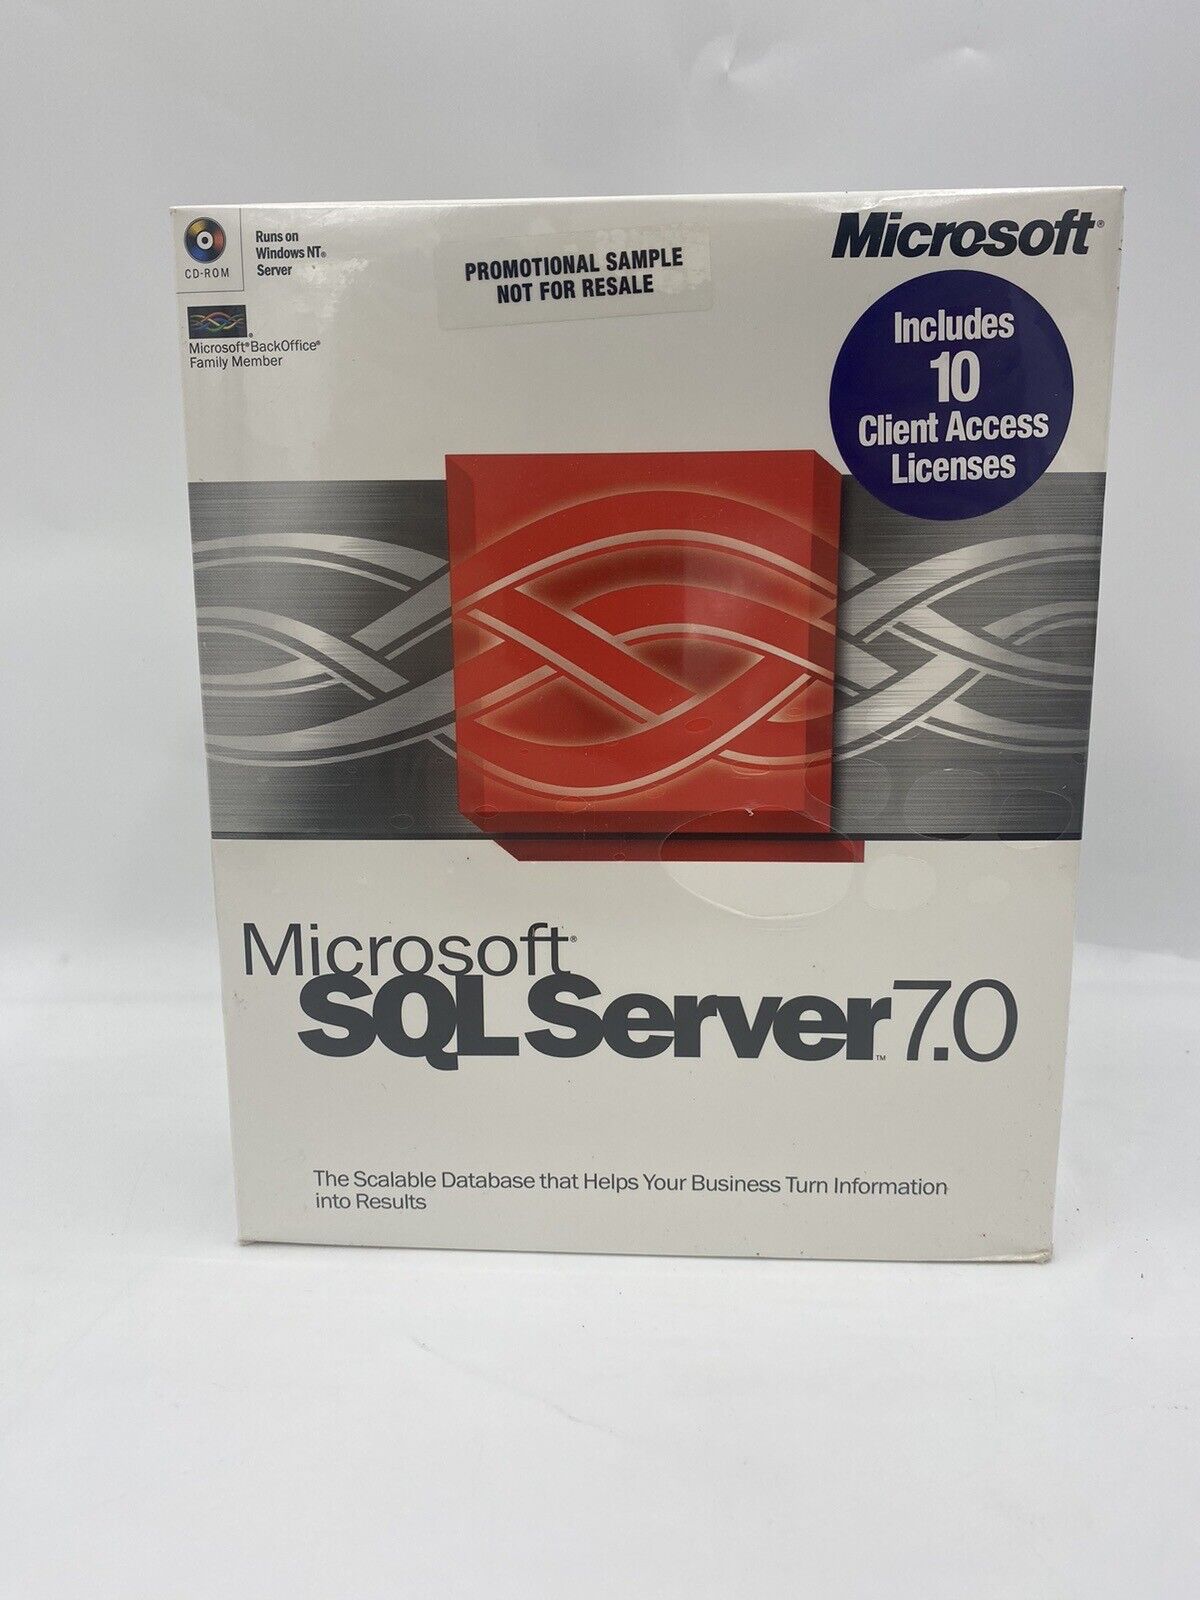 Microsoft SQL Server 7.0 with 10 Licenses - Not For Resale - NEW Factory Sealed